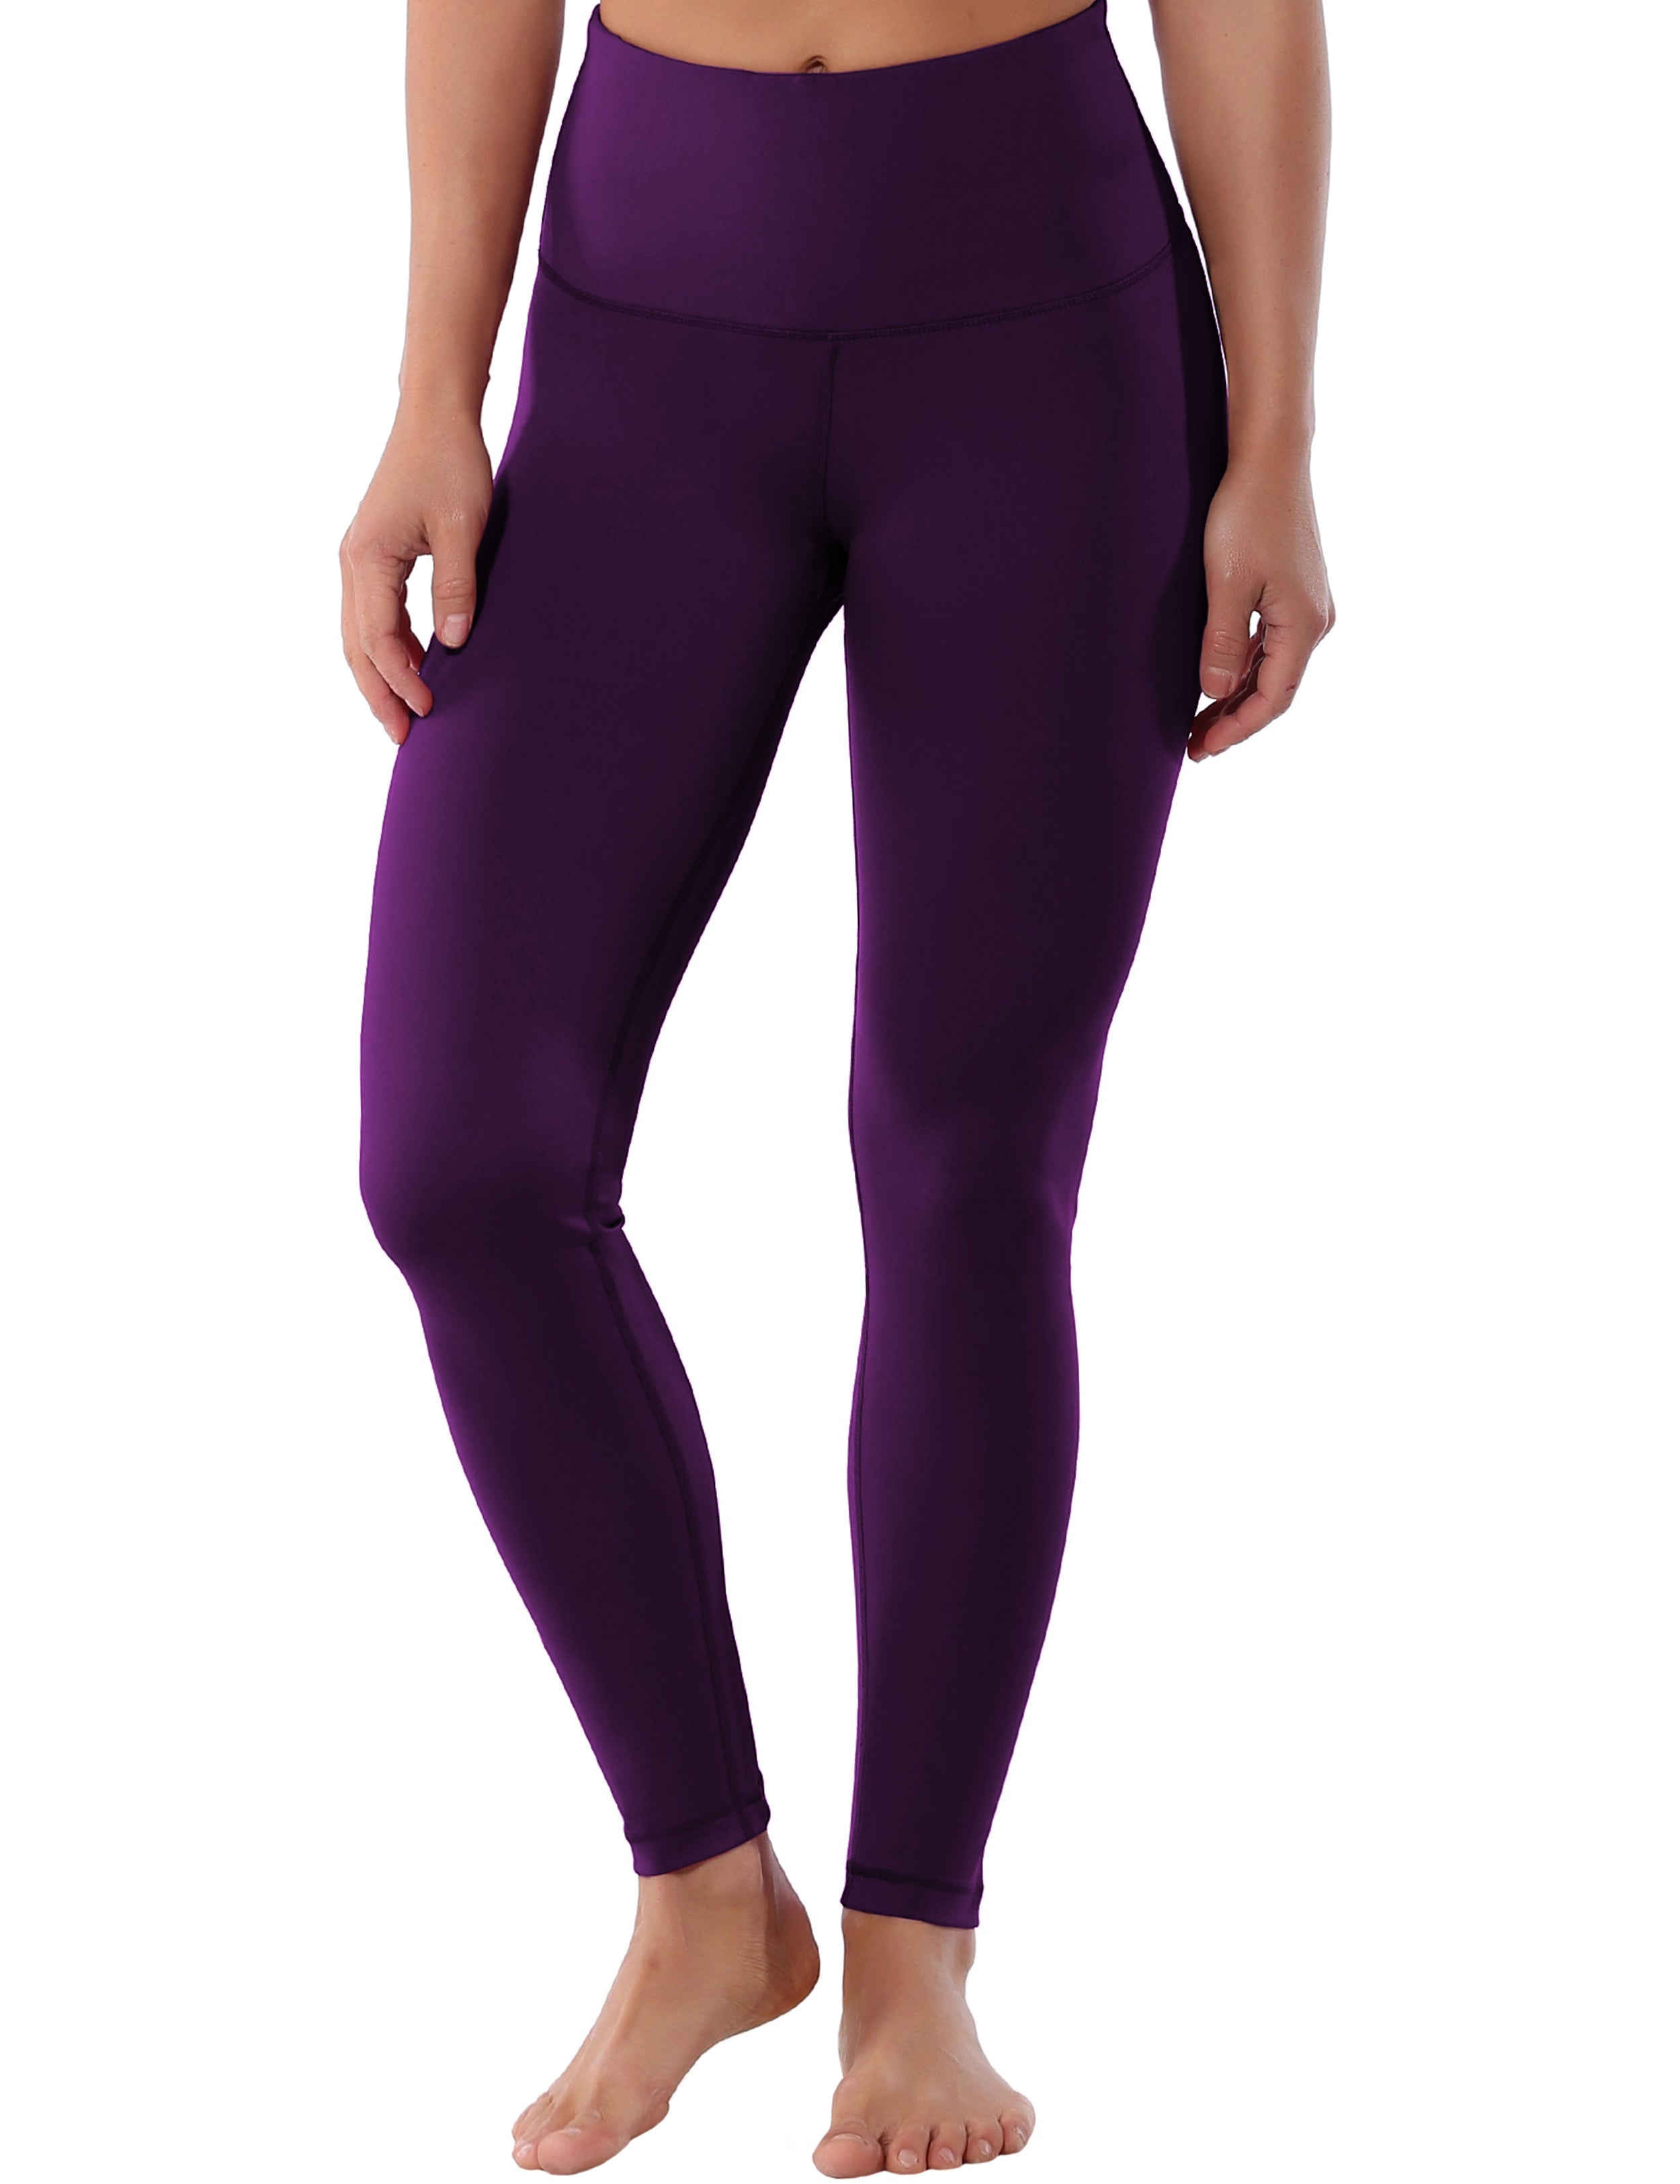 High Waist Running Pants plum 75%Nylon/25%Spandex Fabric doesn't attract lint easily 4-way stretch No see-through Moisture-wicking Tummy control Inner pocket Four lengths